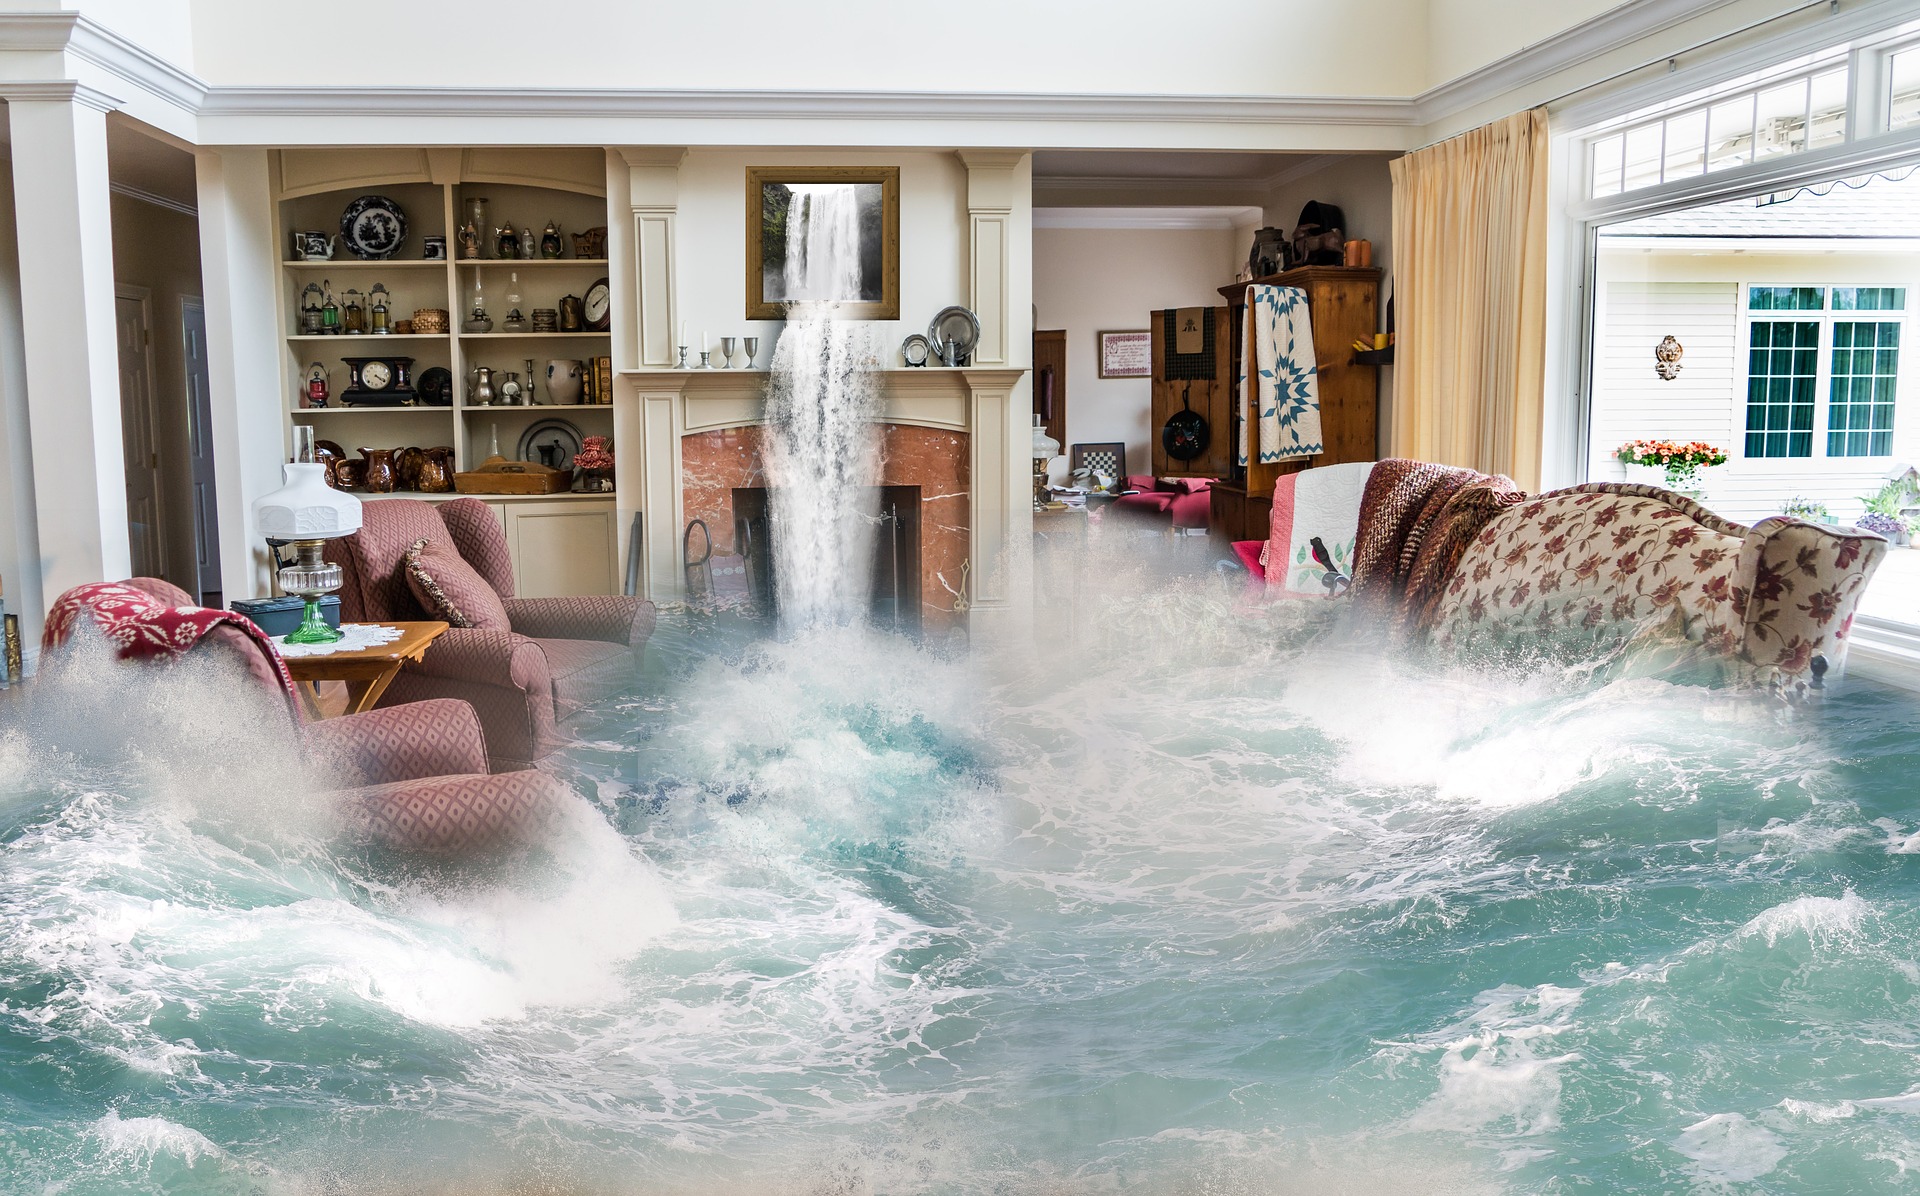 How To Protect Home And Garden From Flooding